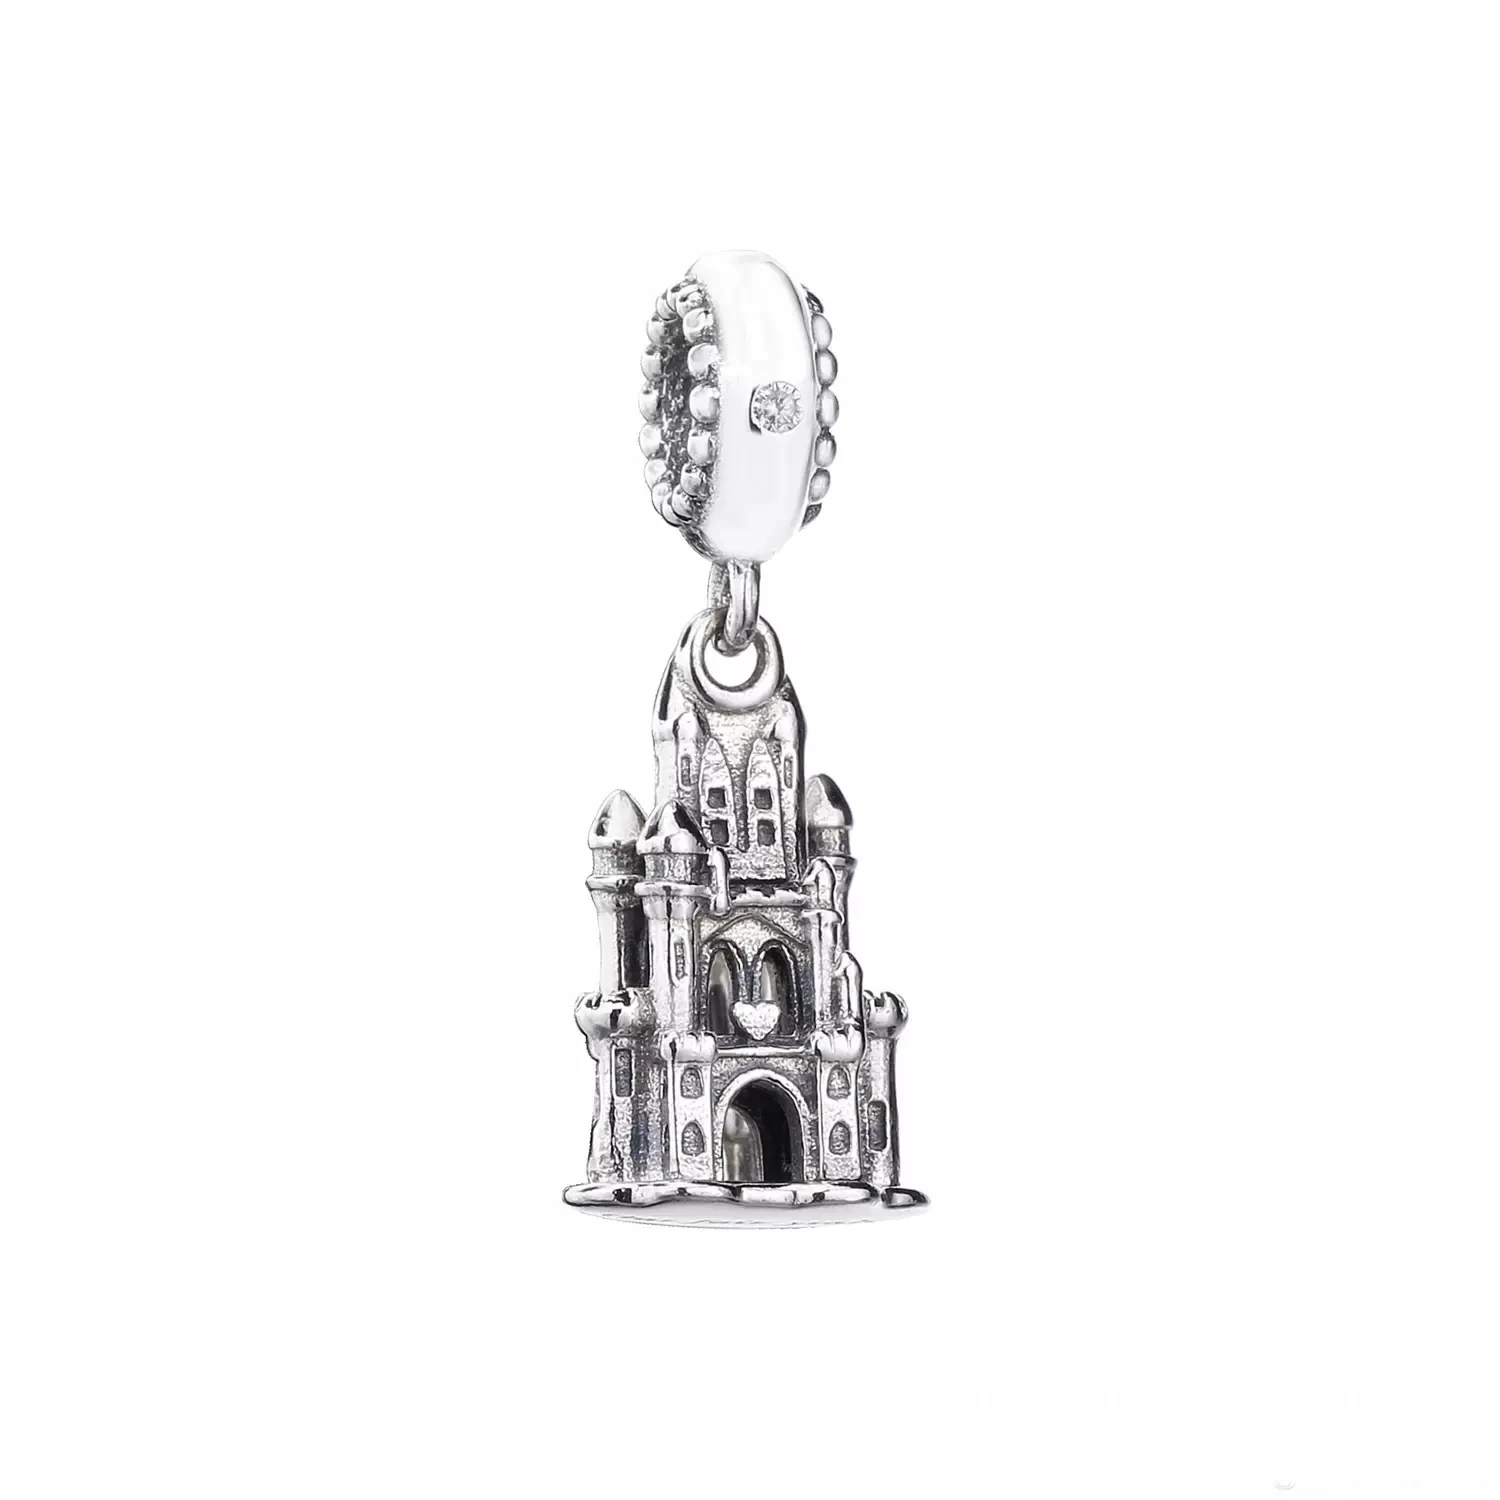 

2022 New 925 Sterling Silver Our Fairy tale Pendant Charm Bead Fits European Jewelry Charm Bracelets